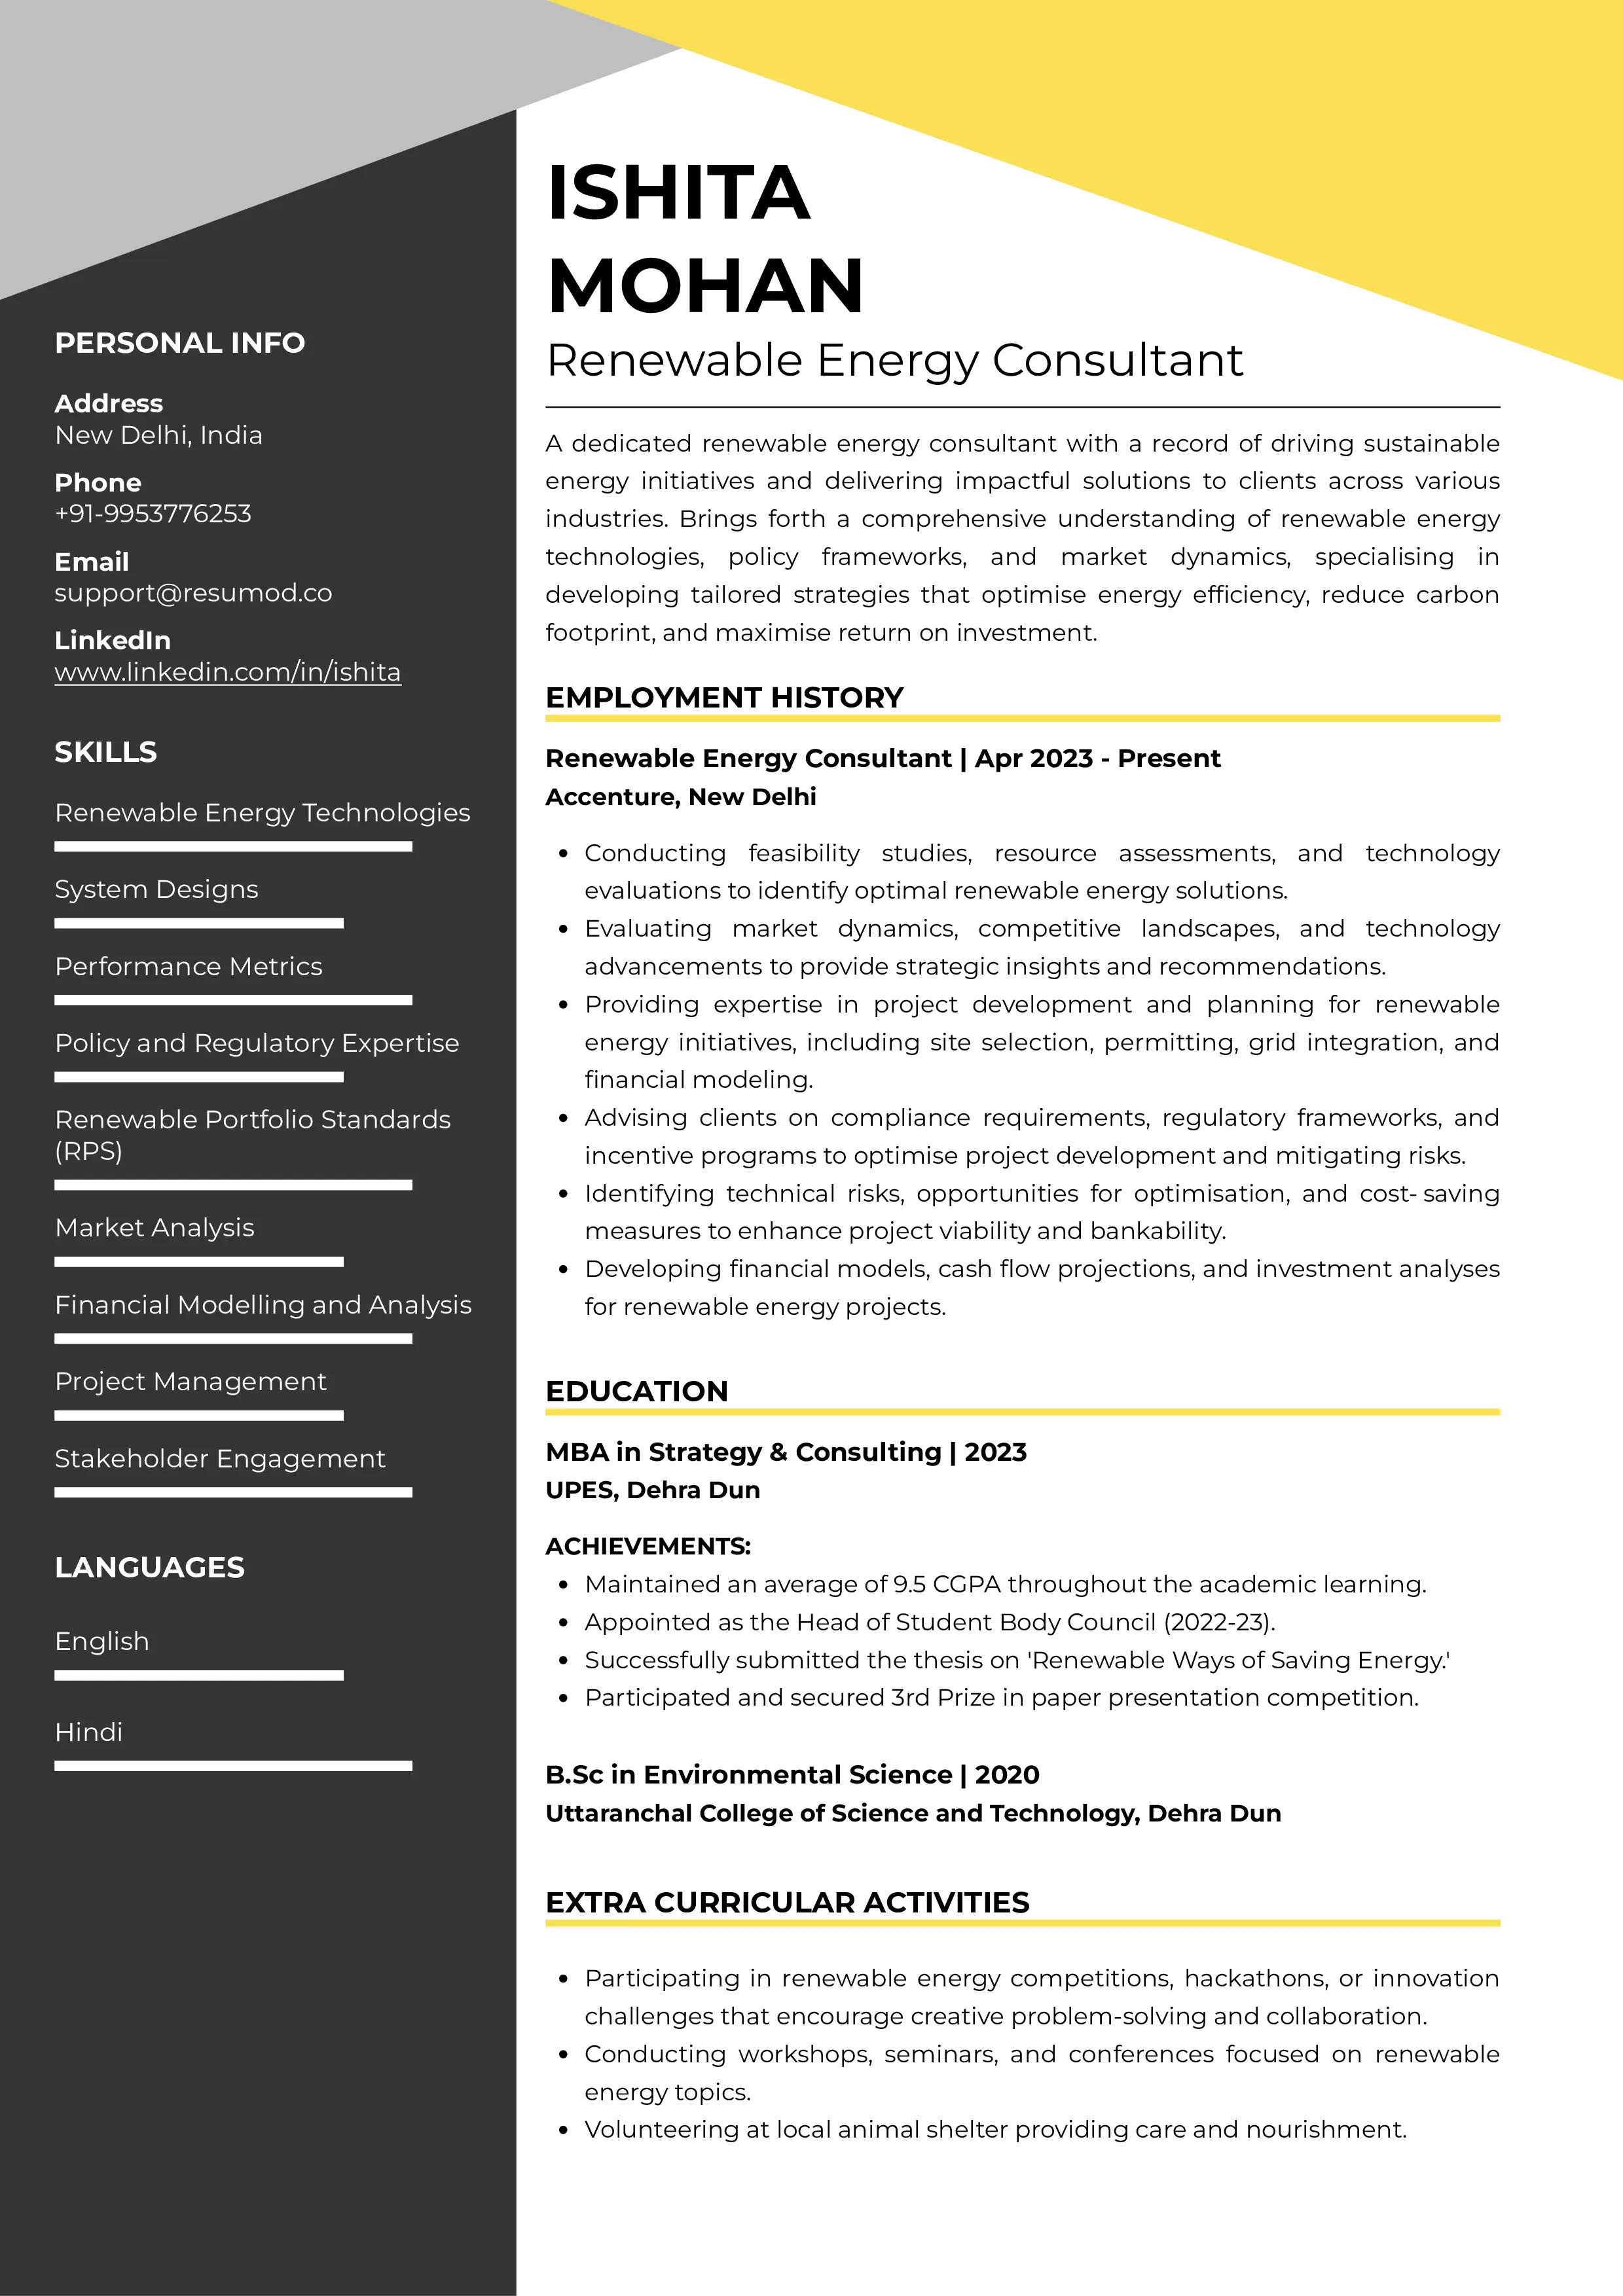 Sample Resume of Renewable Energy Consultant | Free Resume Templates & Samples on Resumod.co